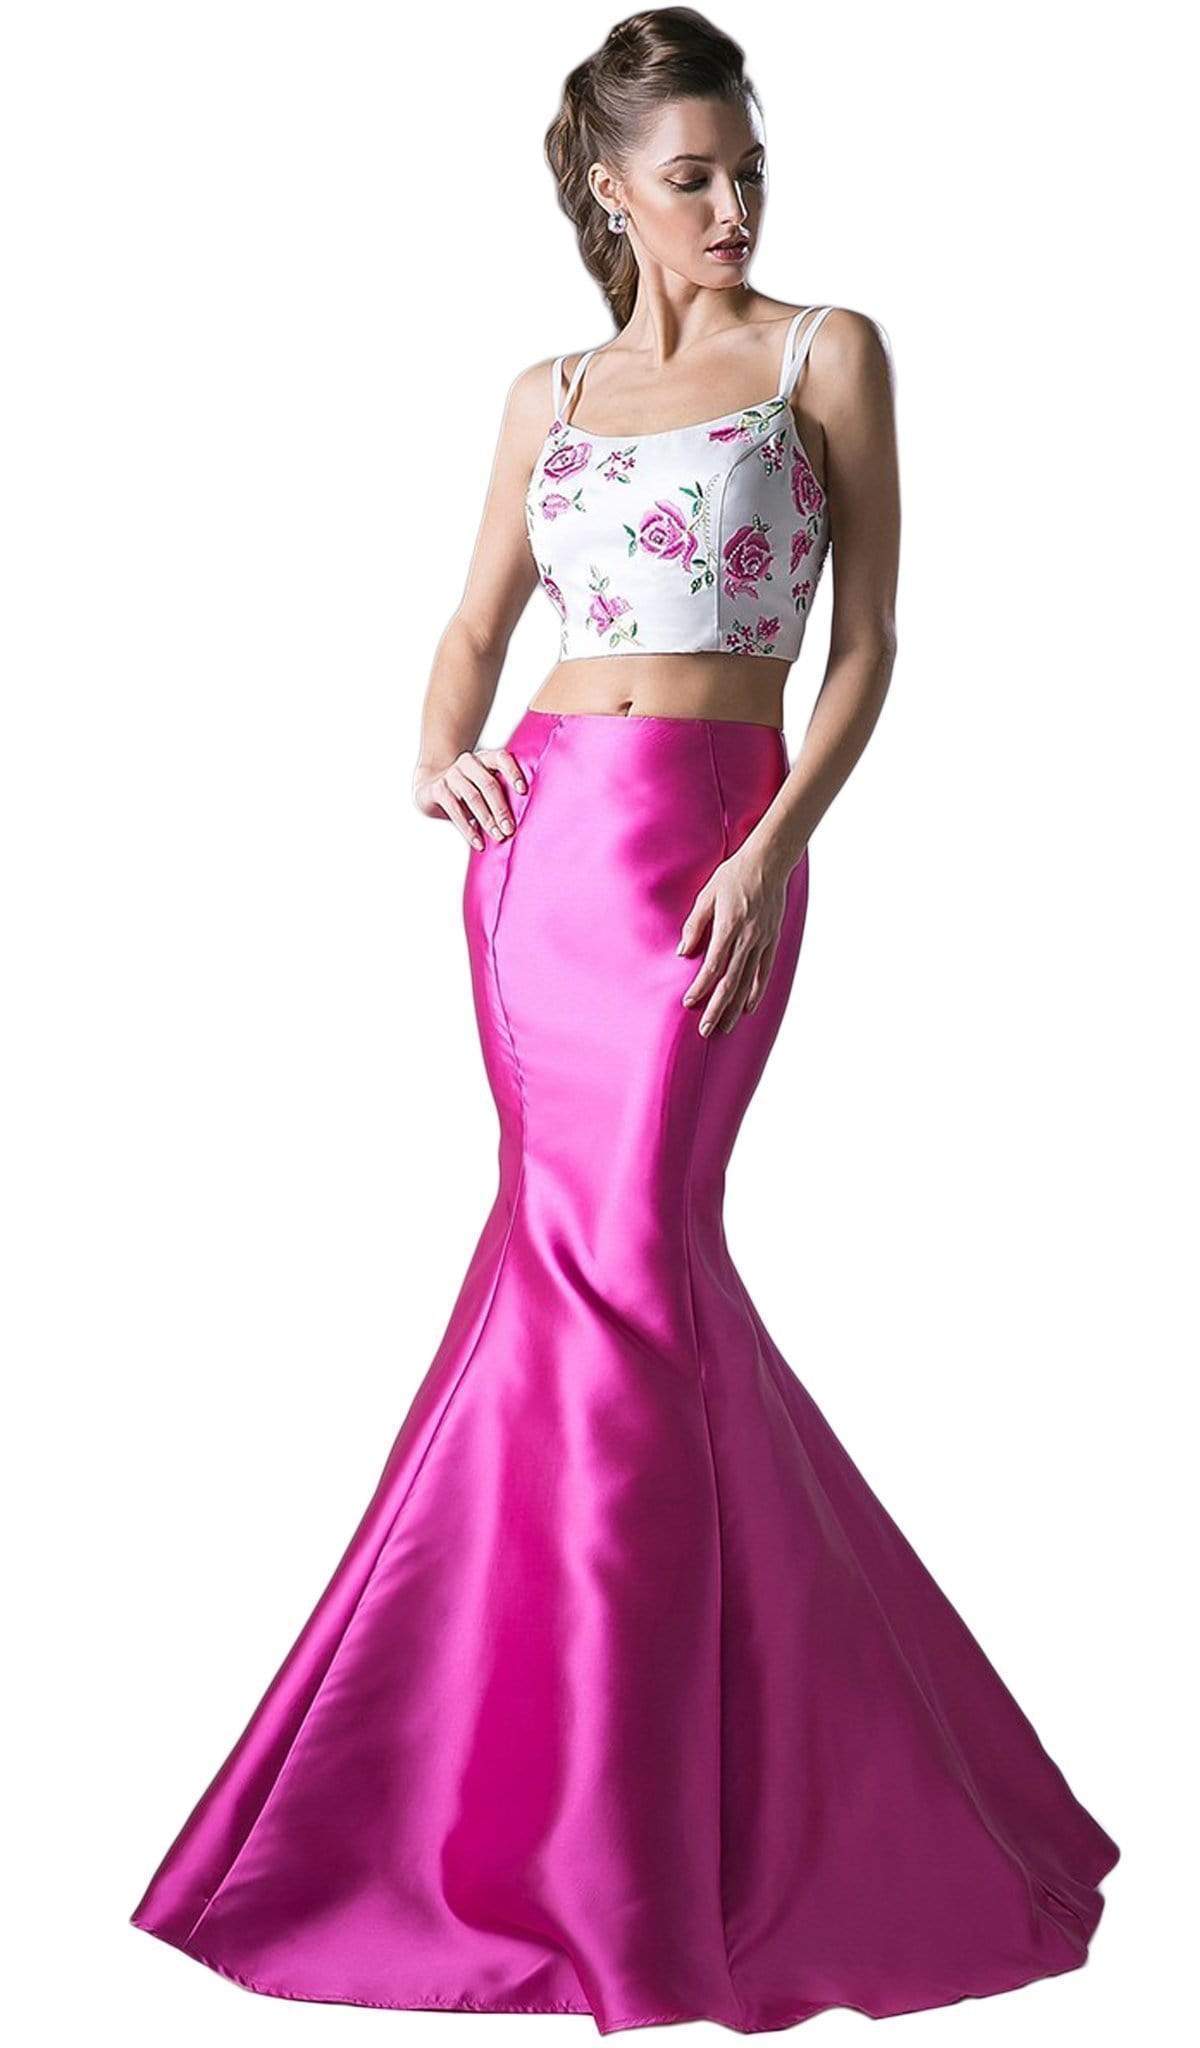 Cinderella Divine - Two Piece Floral Mermaid Evening Dress Special Occasion Dress